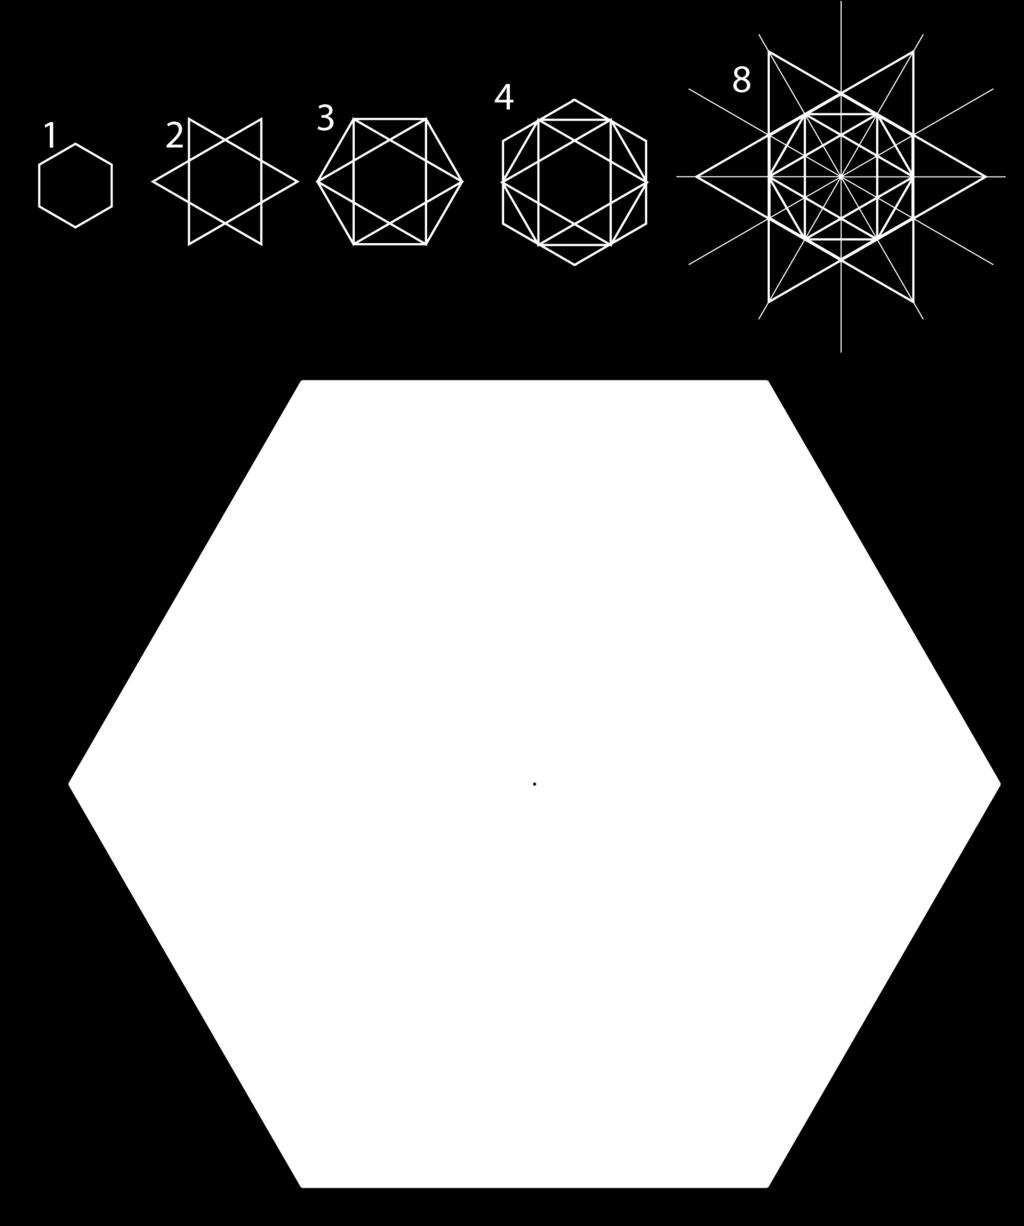 times the area are displayed here, with the original hexagon, providing a